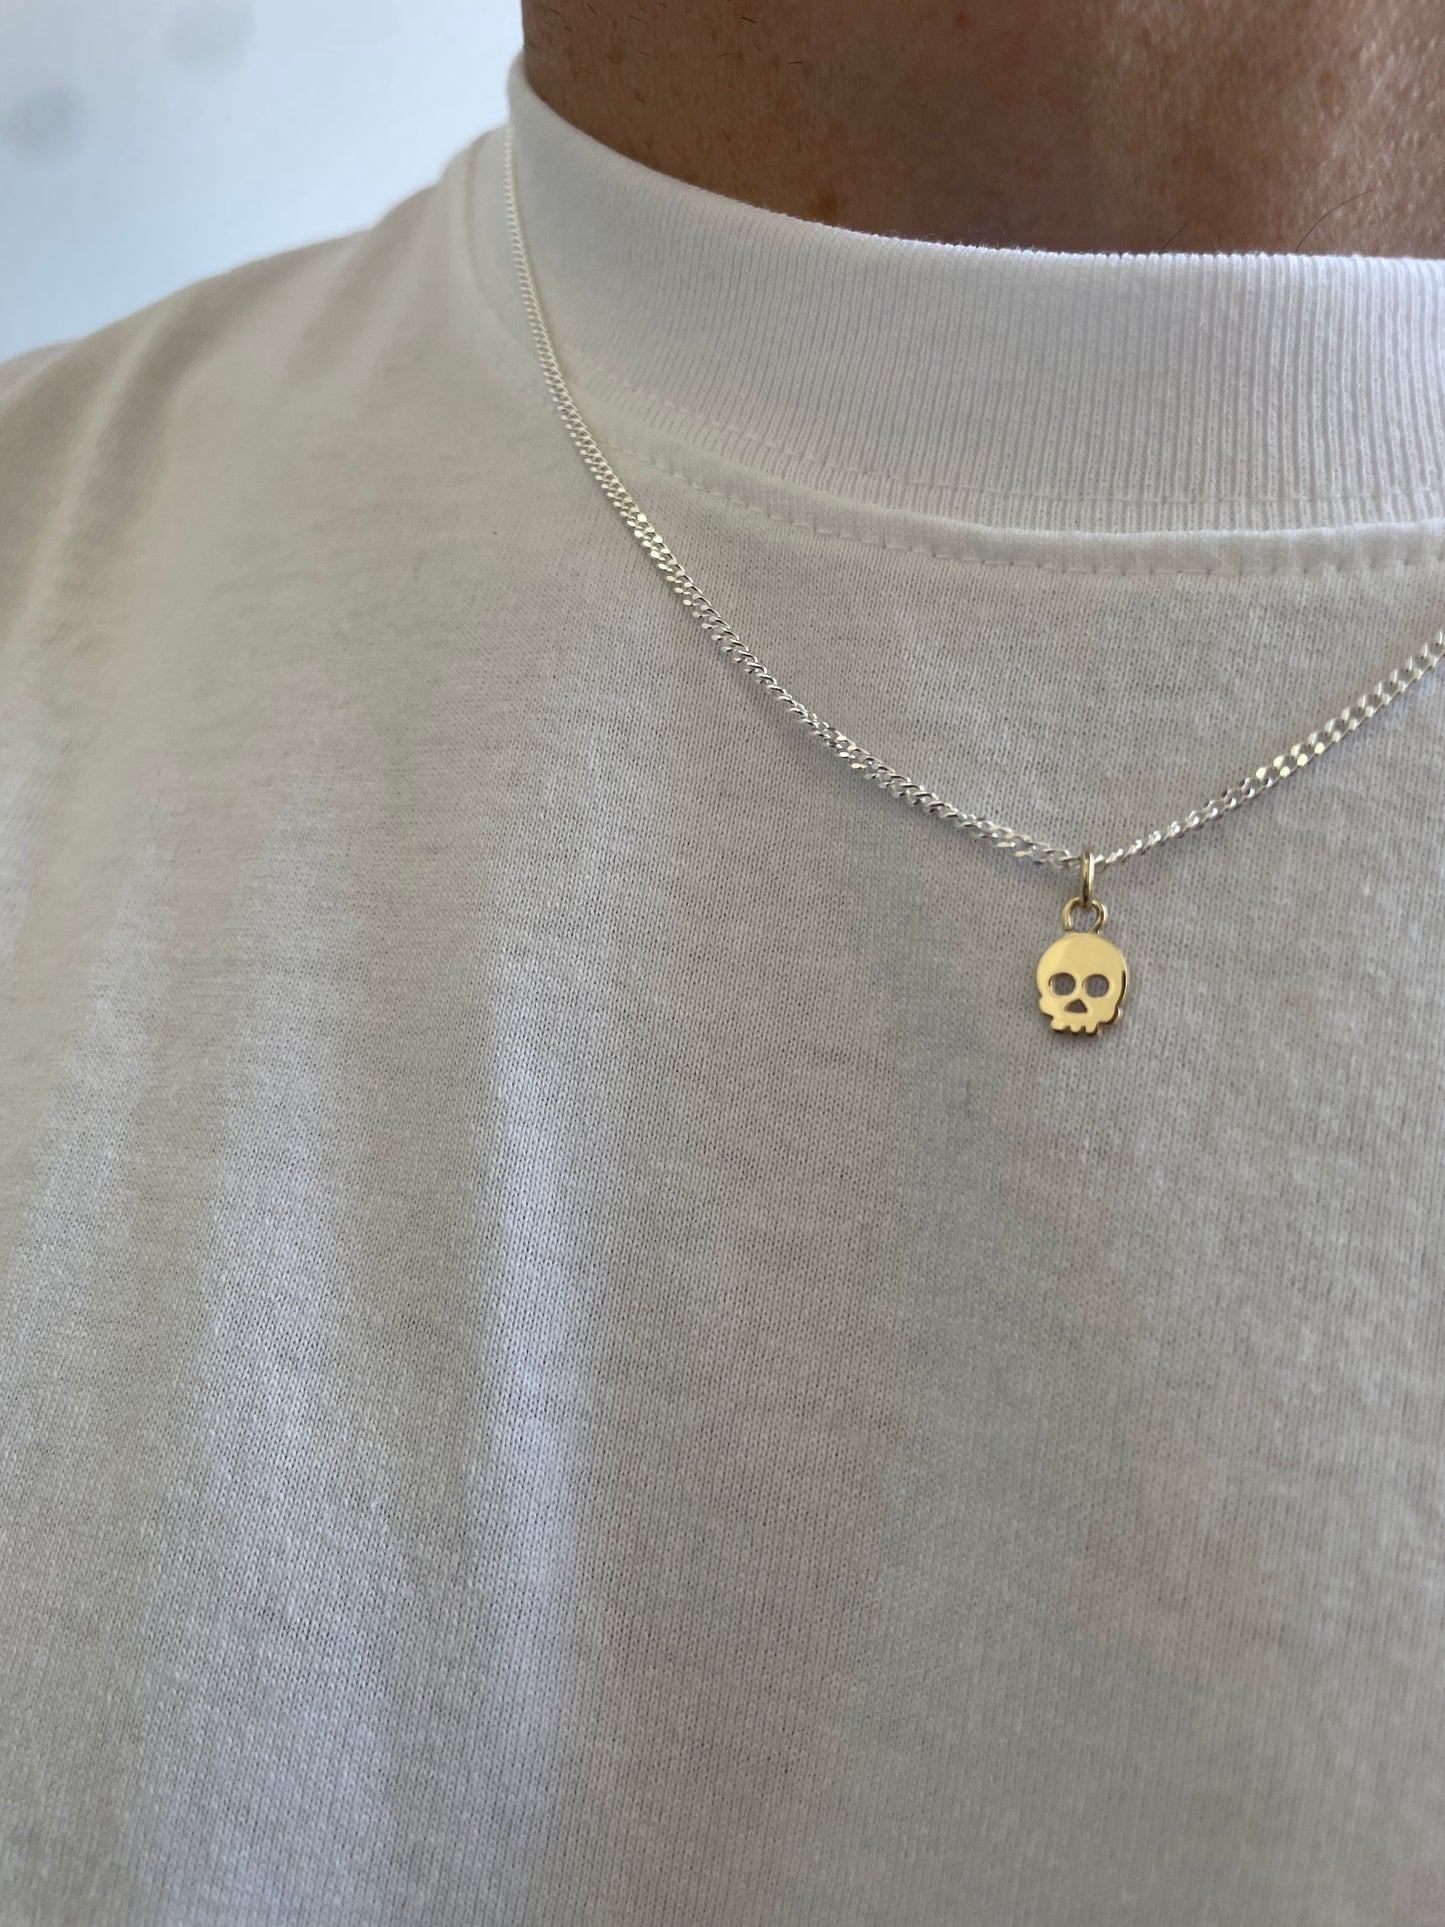 Gold Skull Pendant and Silver Chain